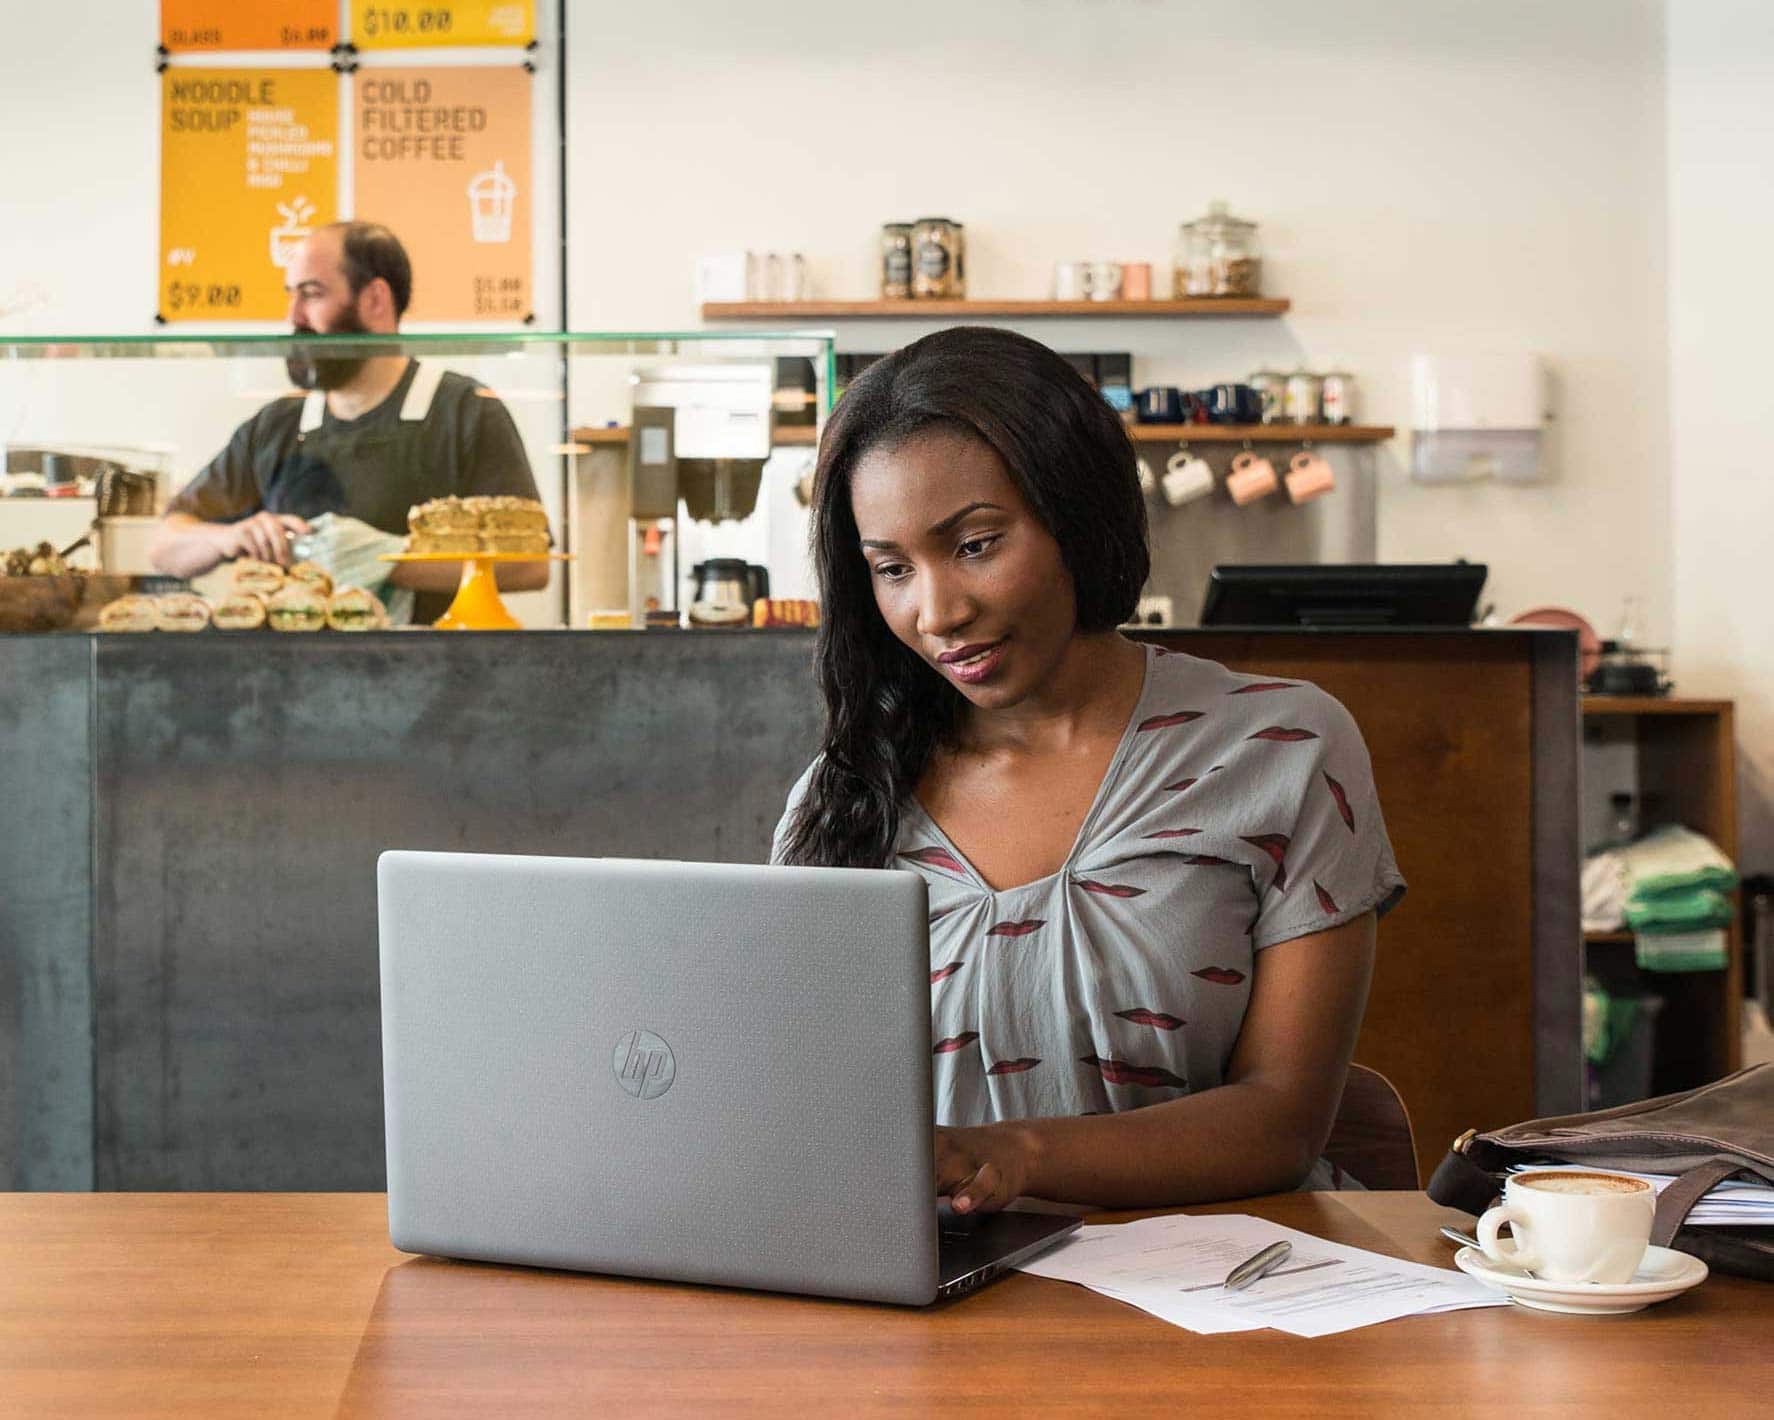 A cafe owner uses accounting software on their laptop to run an efficient business.